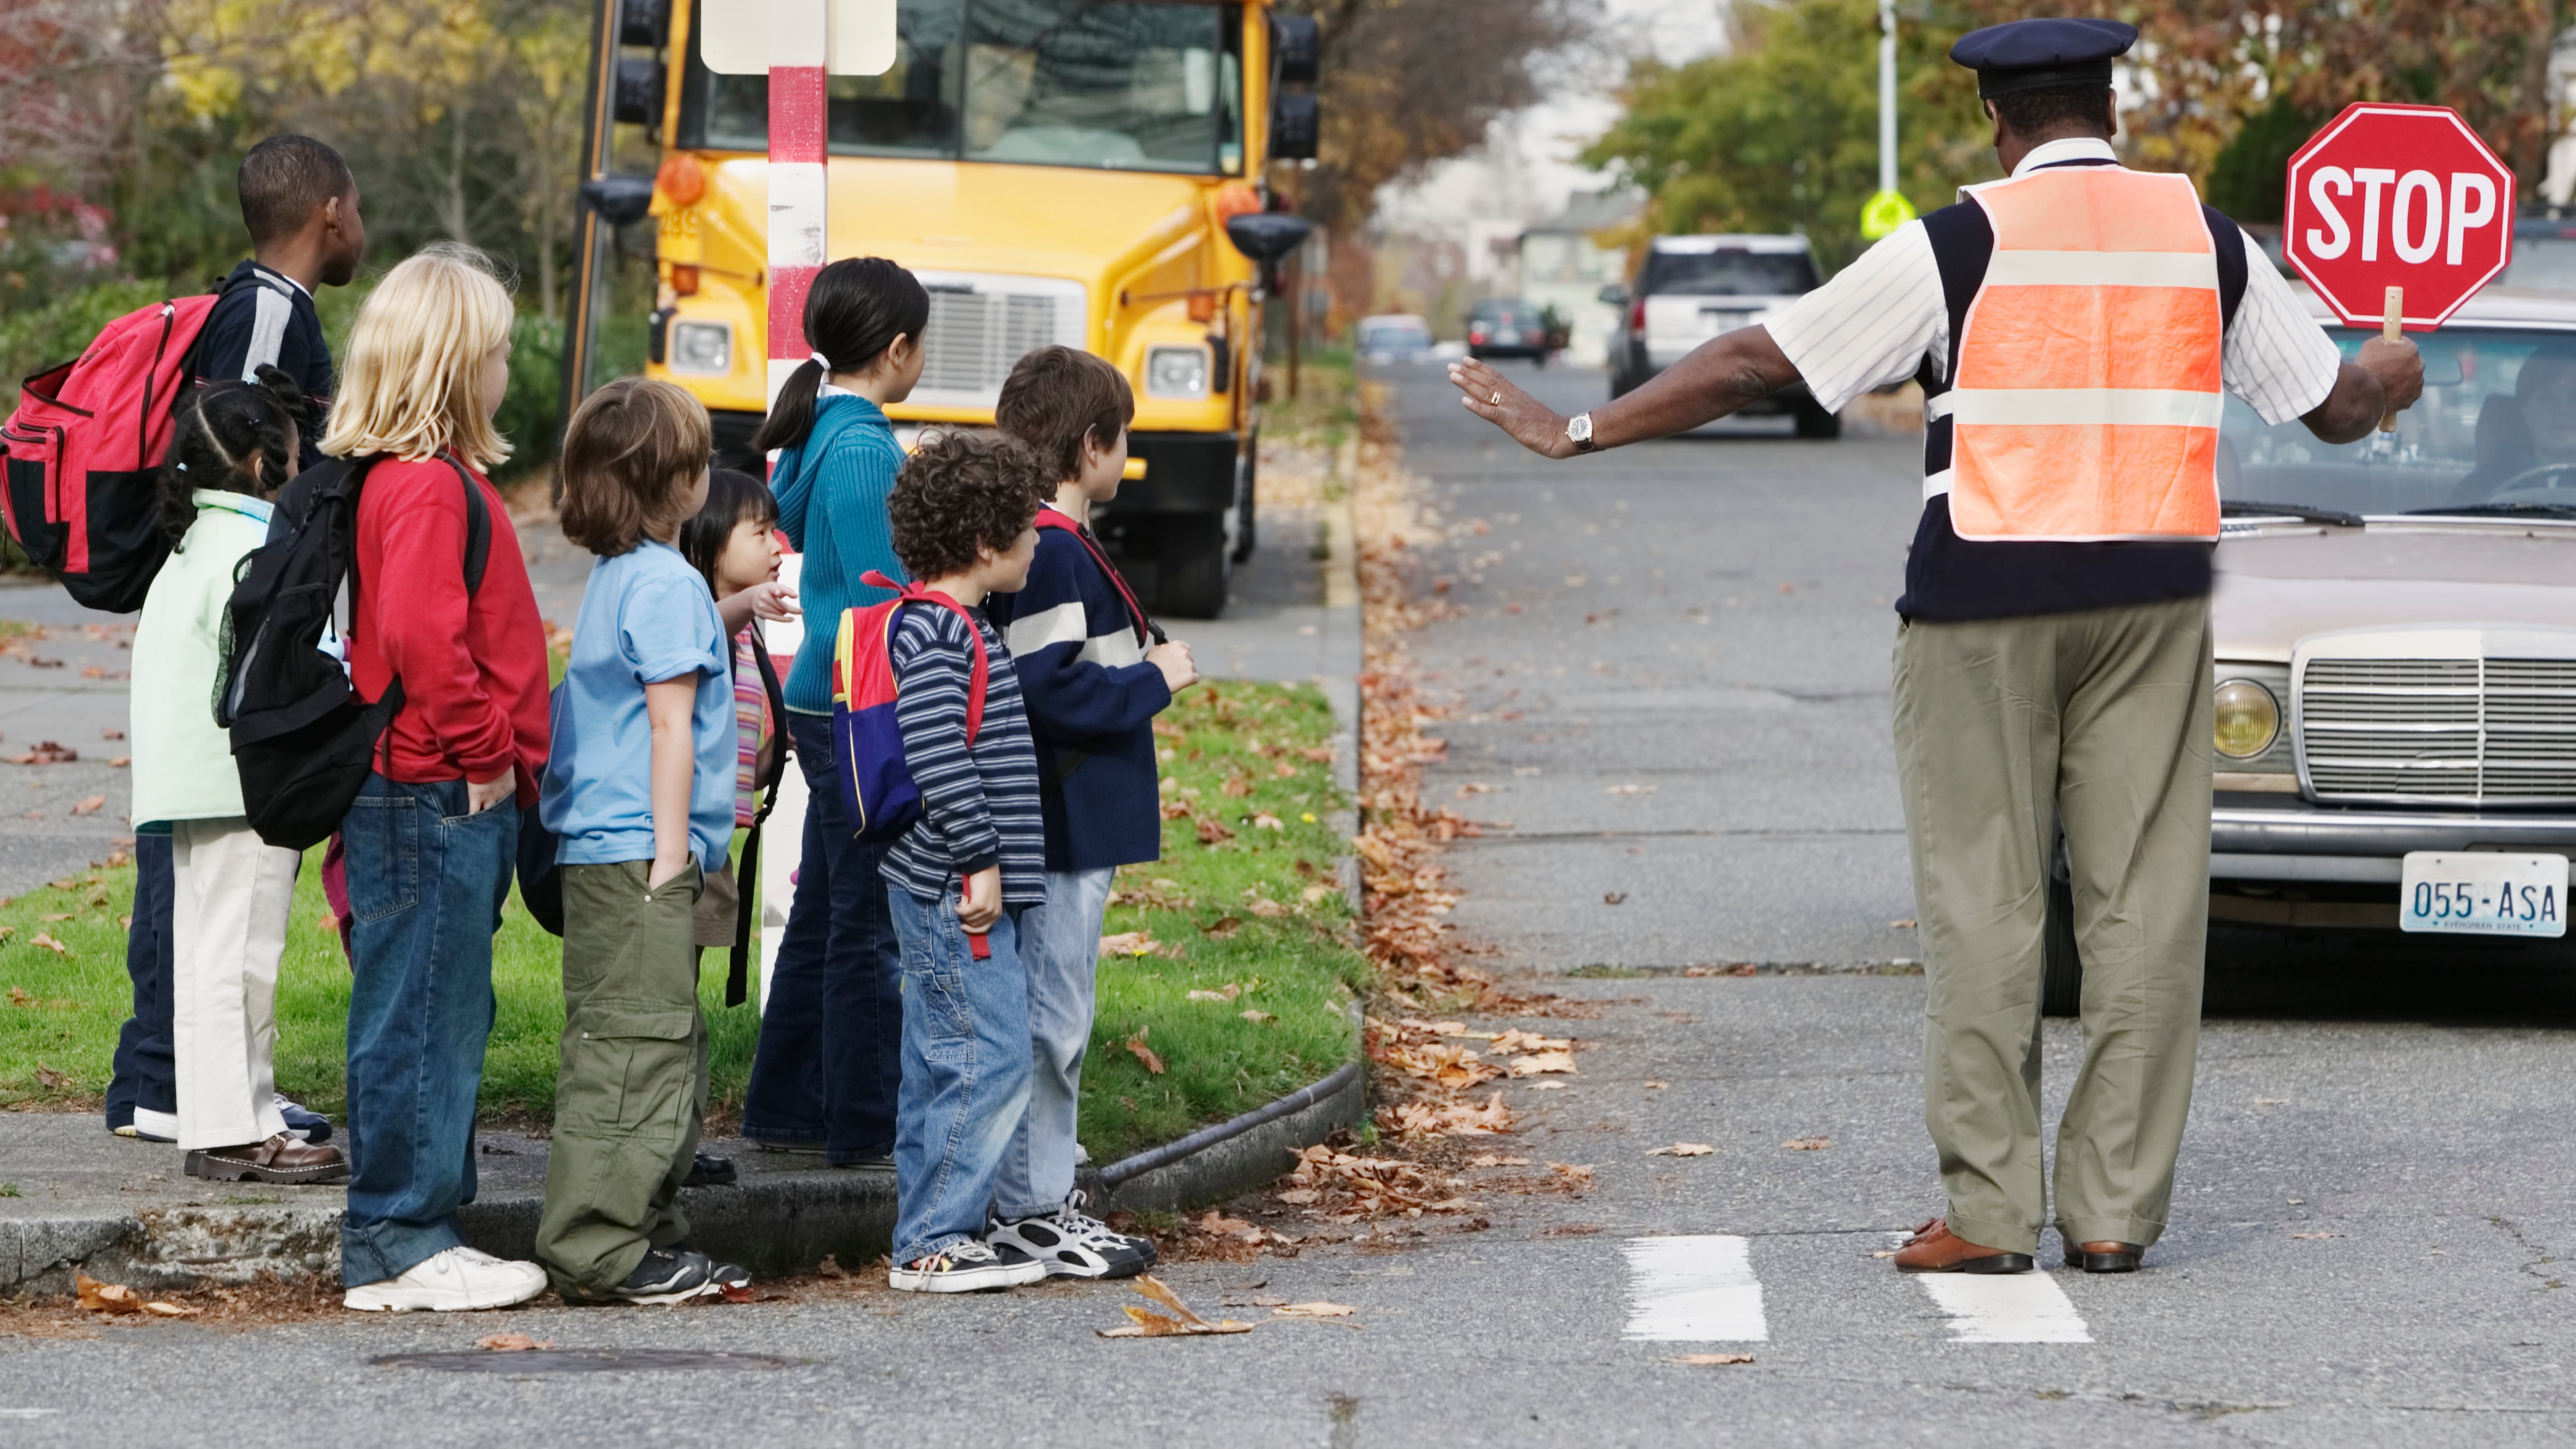 A man holds a stop sign and keeps students back from the street with a school bus in the background